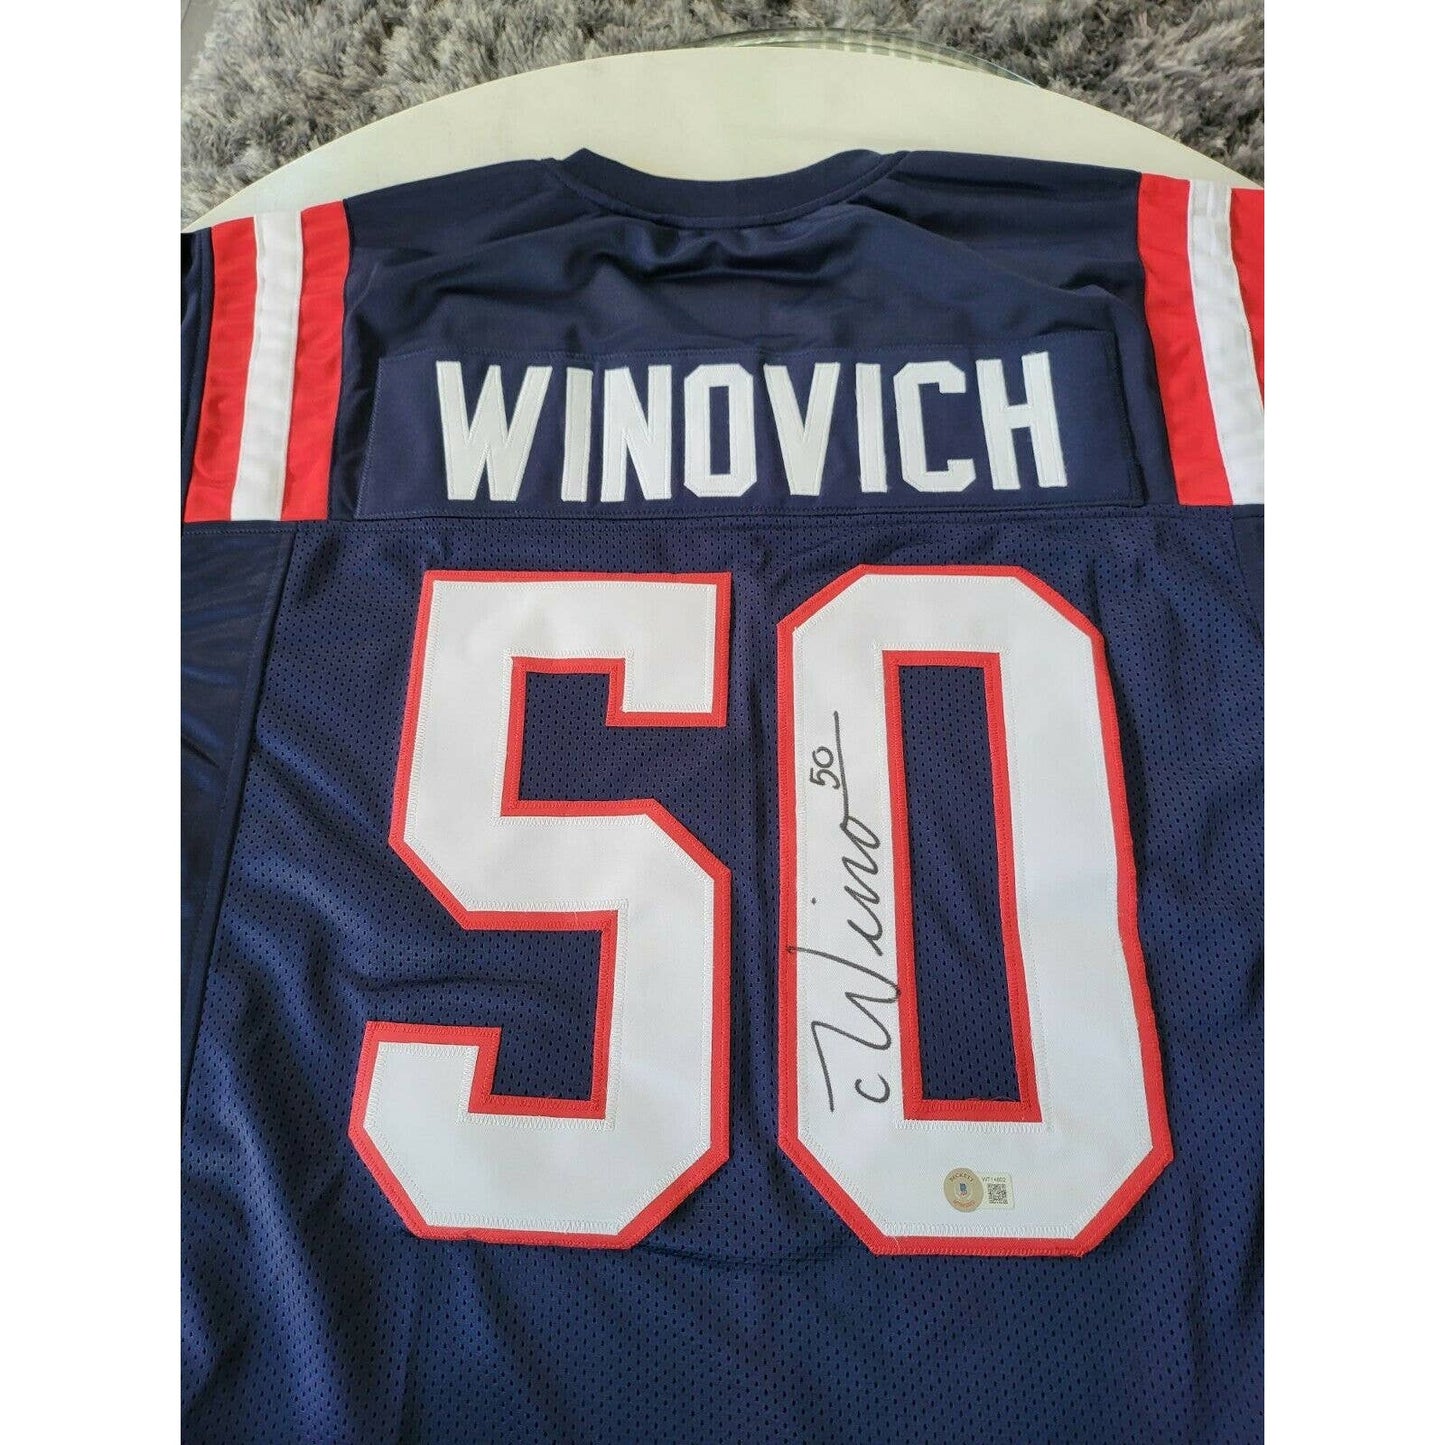 Chase Winovich Autographed/Signed Jersey Beckett Sticker New England Patriots - TreasuresEvolved